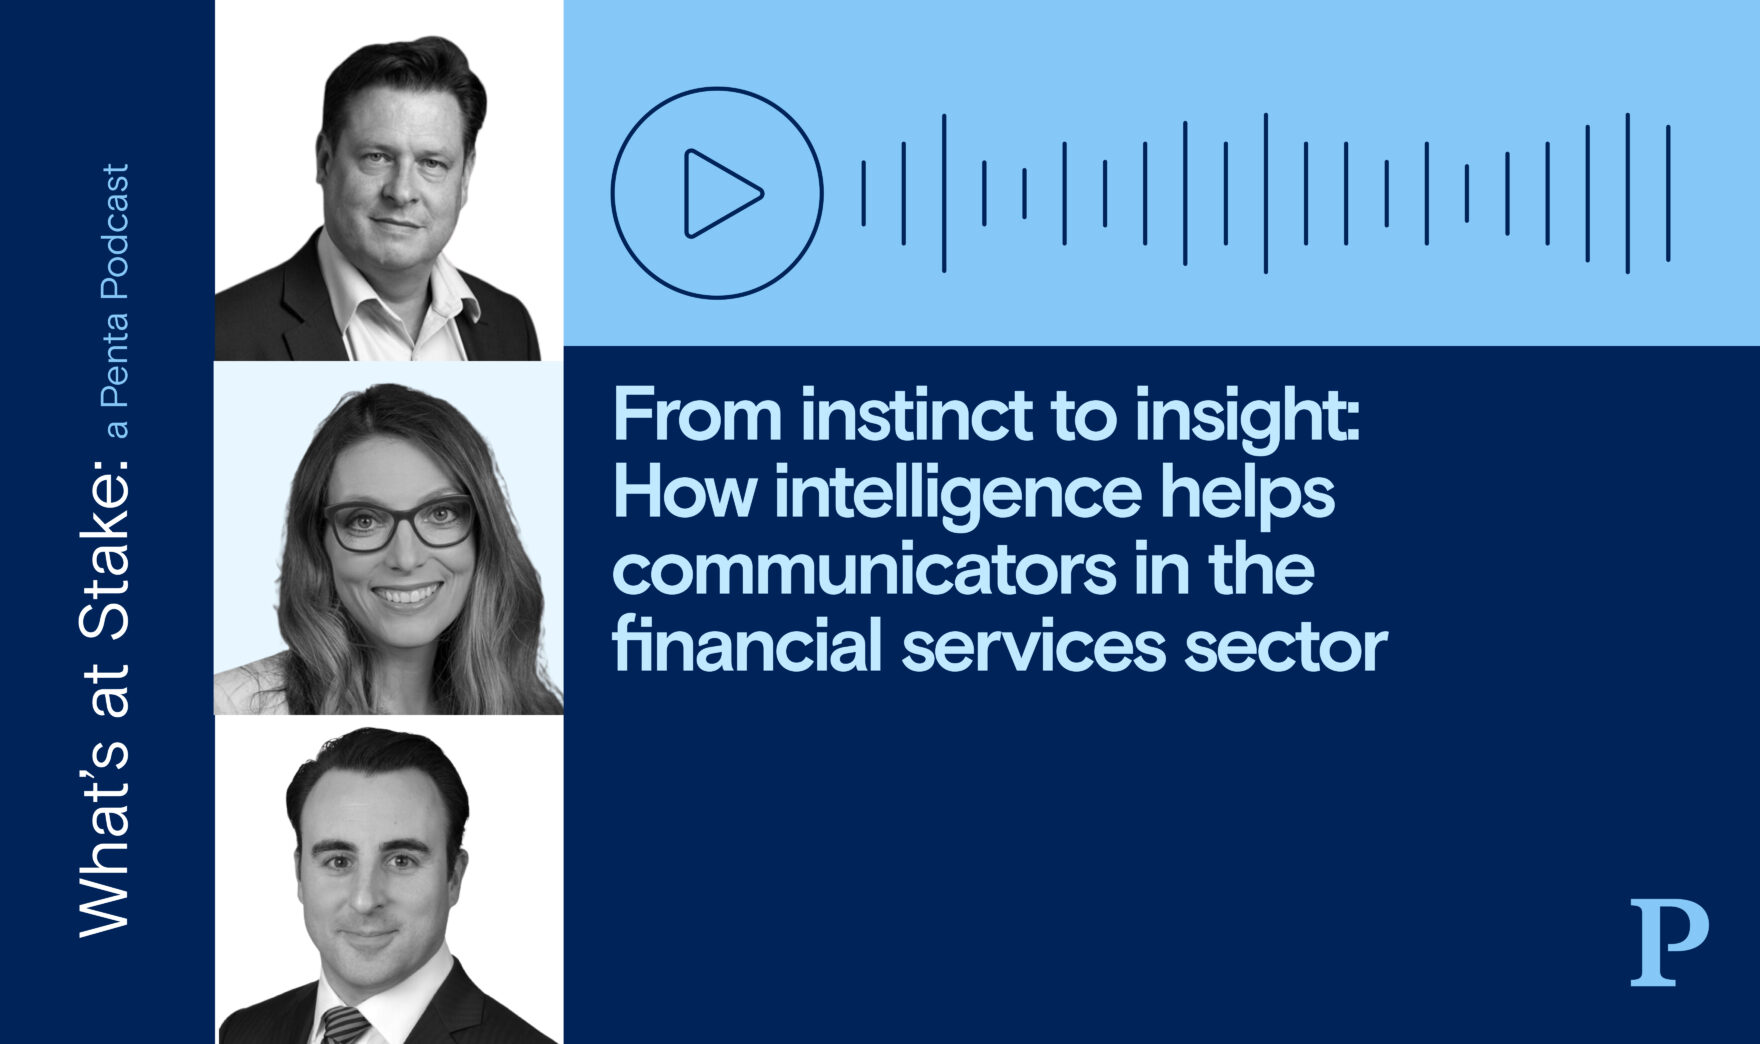 From instinct to insight: How intelligence helps communicators in the financial services sector